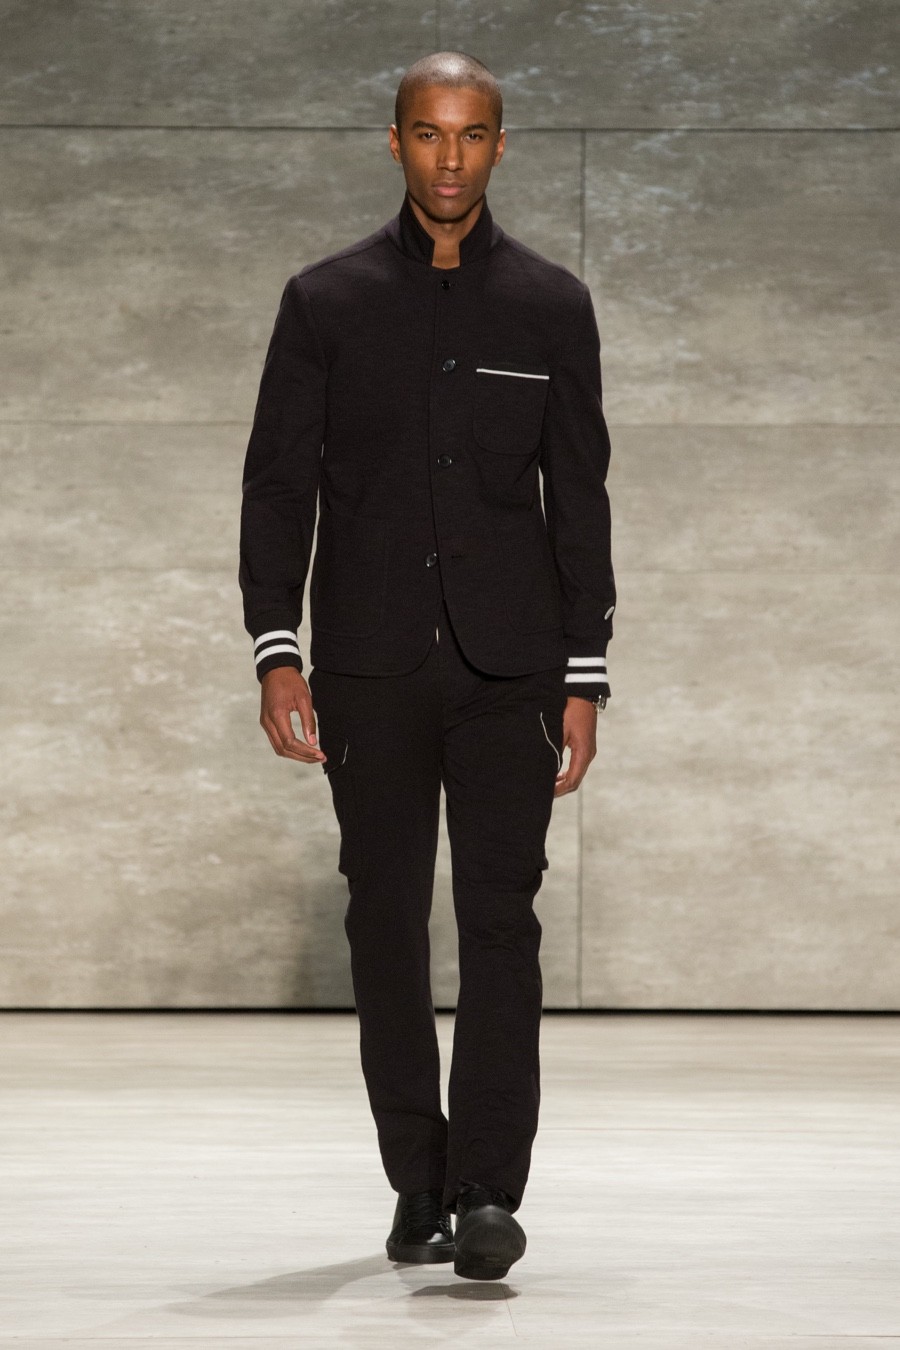 Todd Snyder Fall/Winter 2015 Menswear Collection